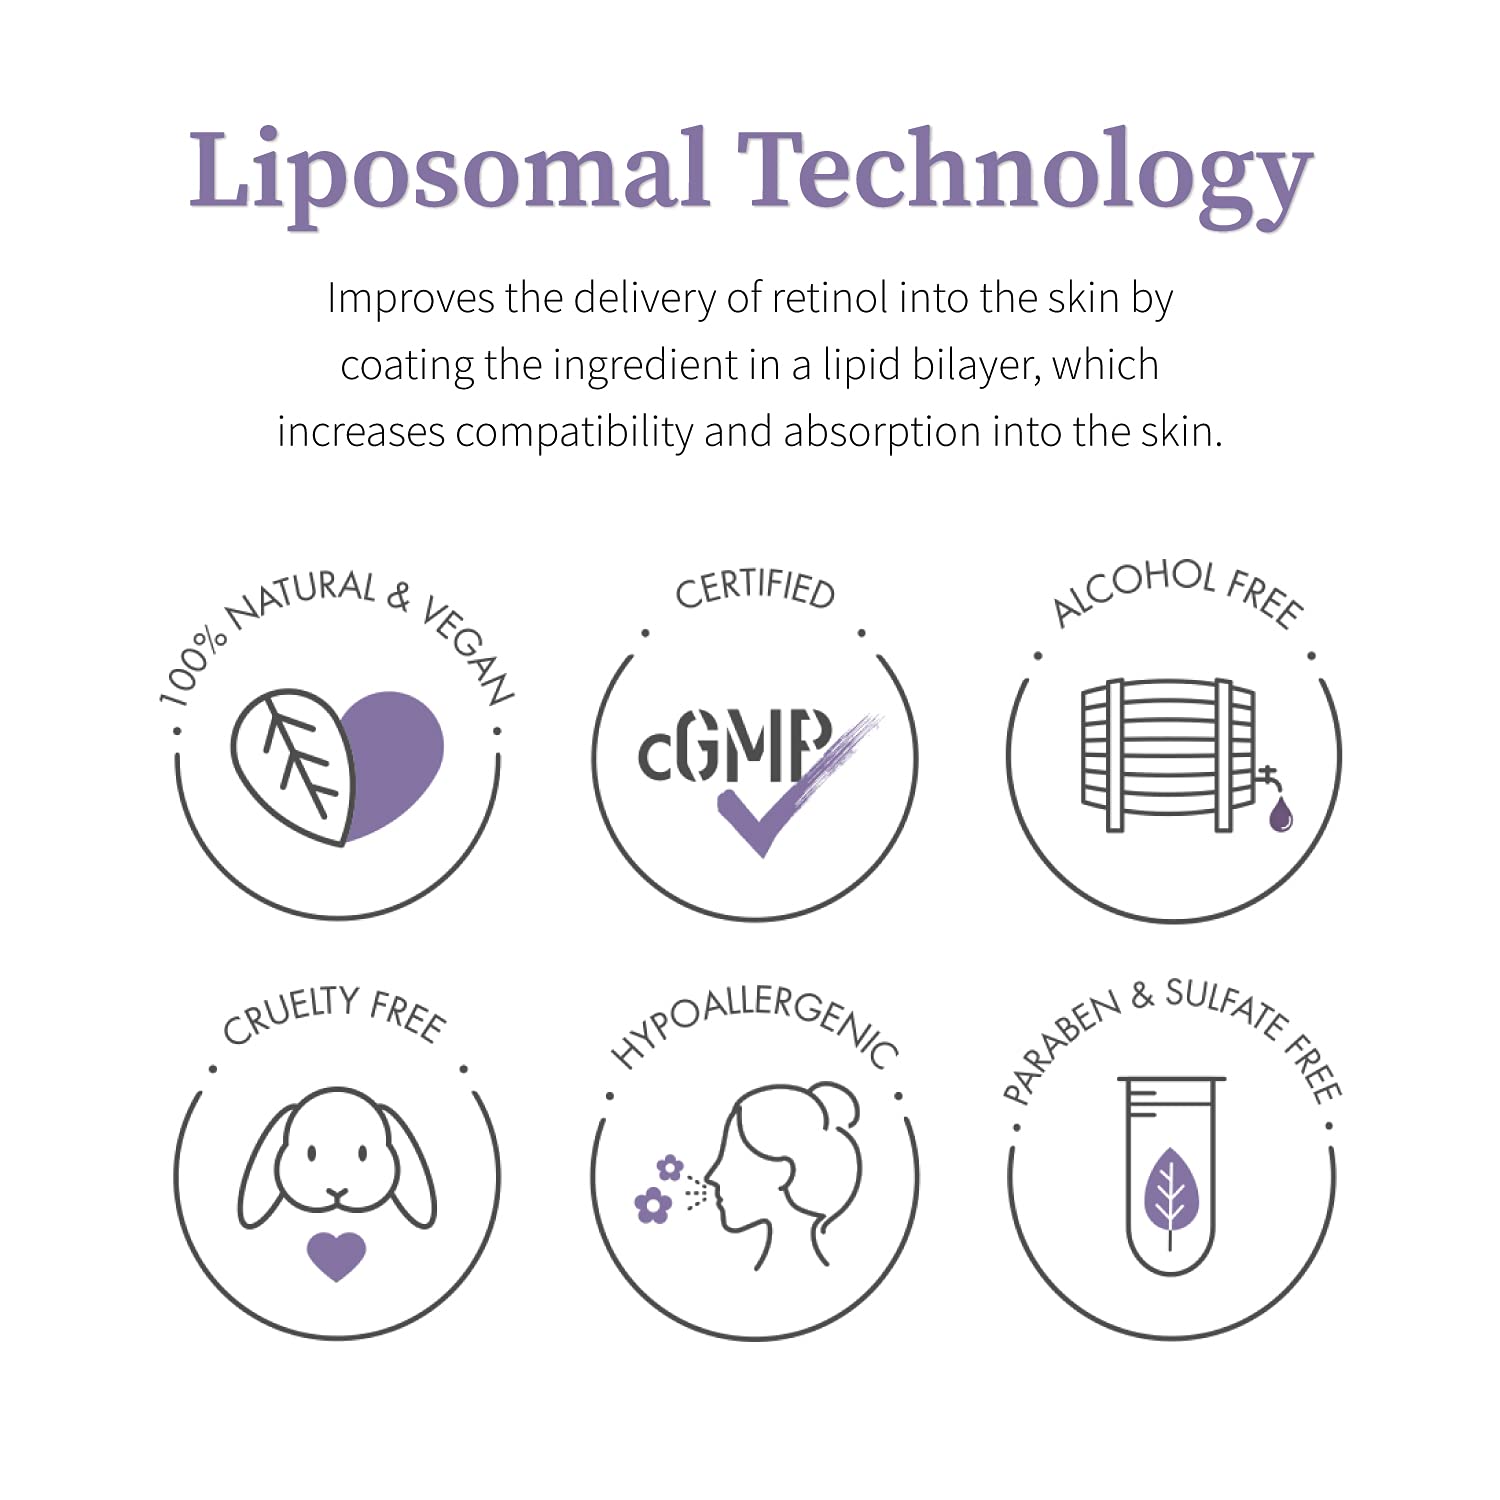 Liposomal Technology improves the delivery of retinol into the skin by coating the ingredient in a lipid bilayer, which increases compatibility and absorption into skin. 100% natural, CGMP certified, Alcohol free, Cruelty free, Hypoallergenic, Paraben & Sulfate free.